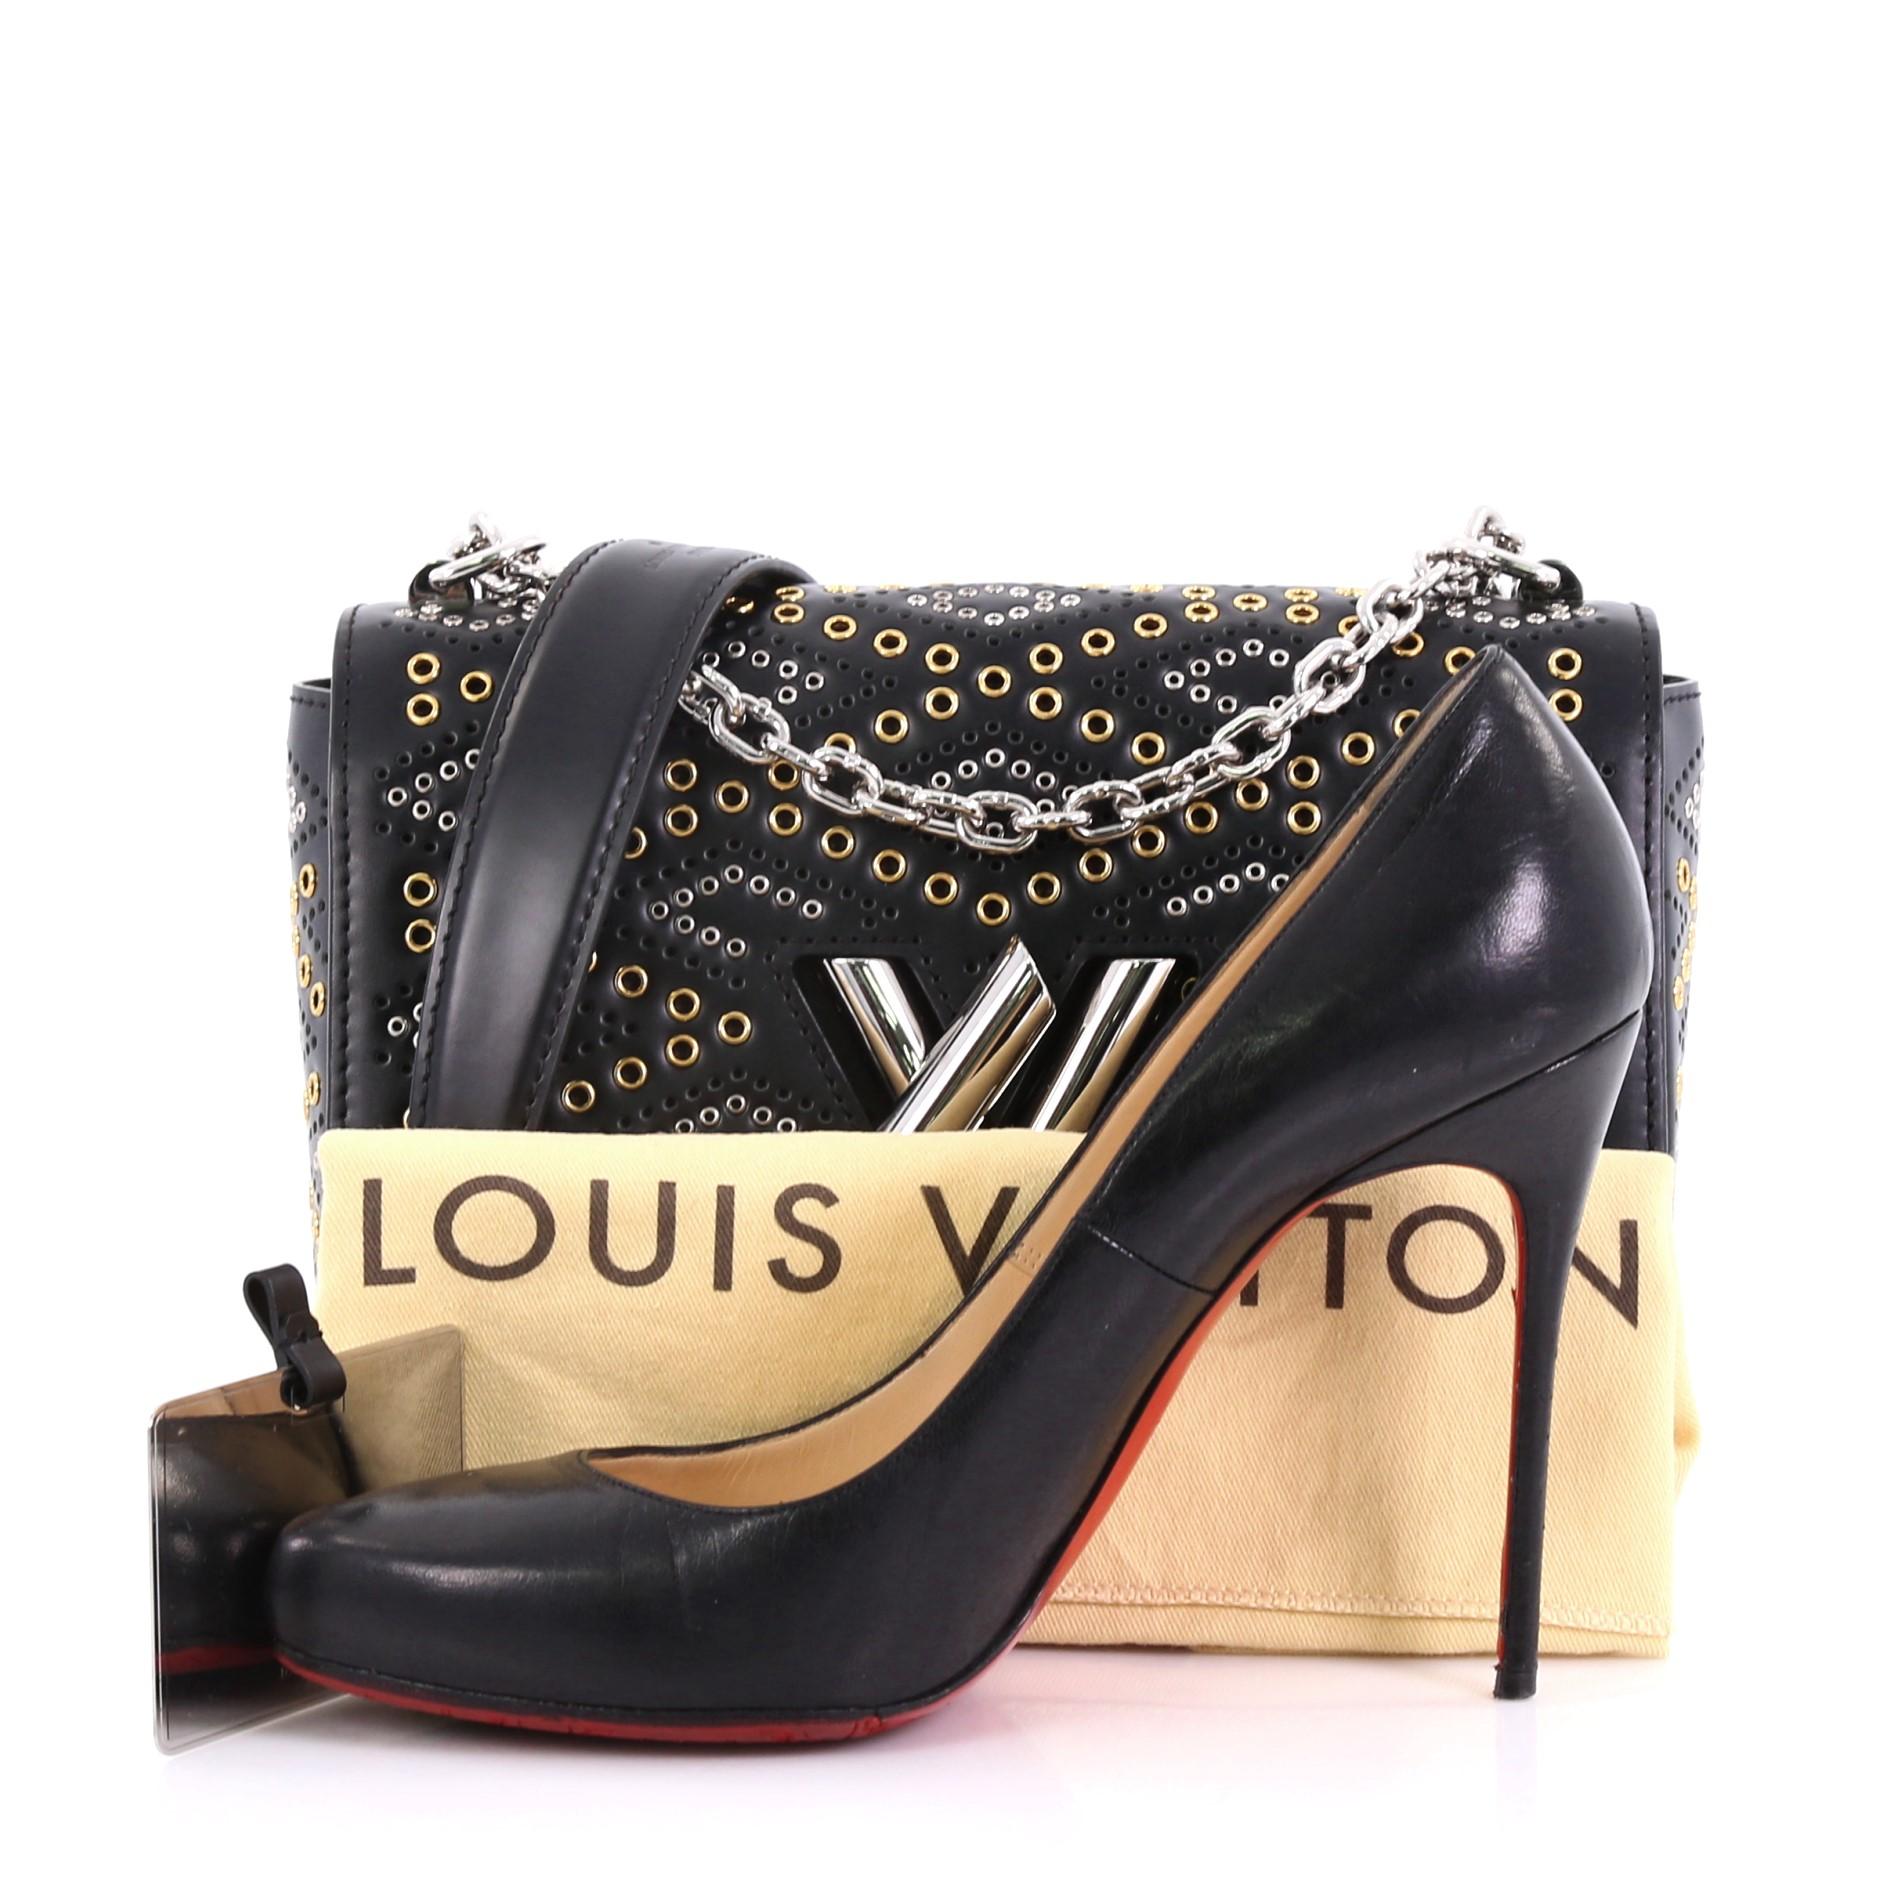 This Louis Vuitton Twist Handbag Limited Edition Grommet Embellished Leather MM, crafted from black grommet embellished leather, features a chain link strap with leather pad, frontal flap, and silver-tone hardware. Its LV twist lock closure opens to